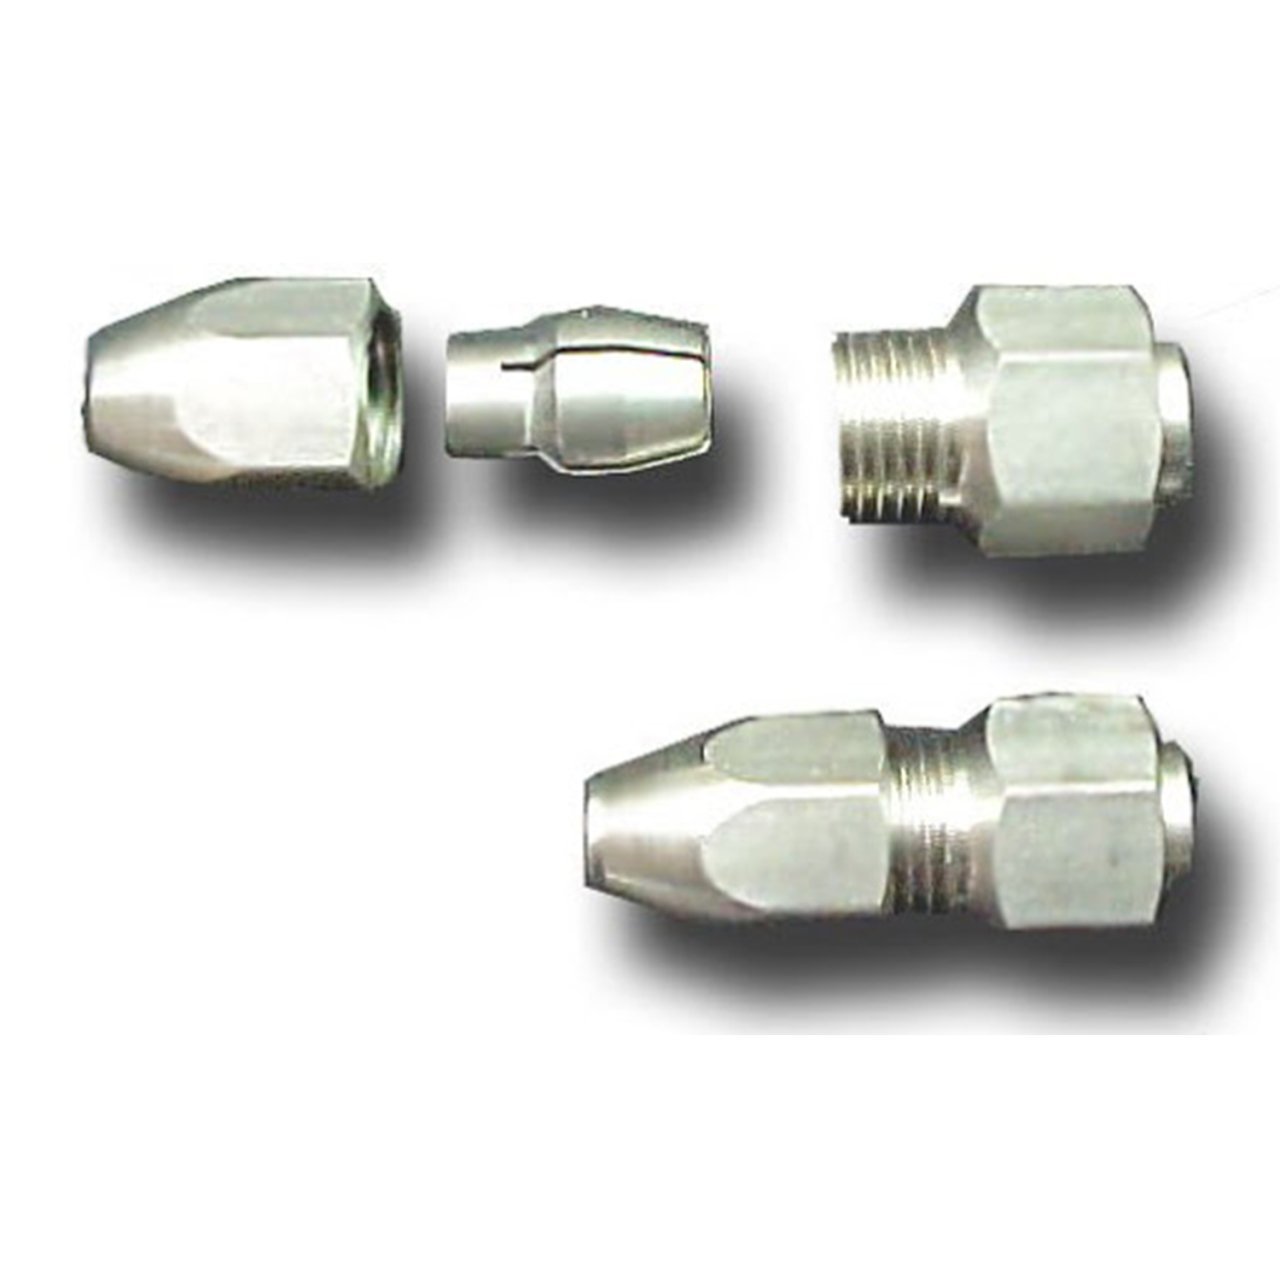 5404 FLEXİBLE DRIVE CABLE COLLET -12.00 MM.